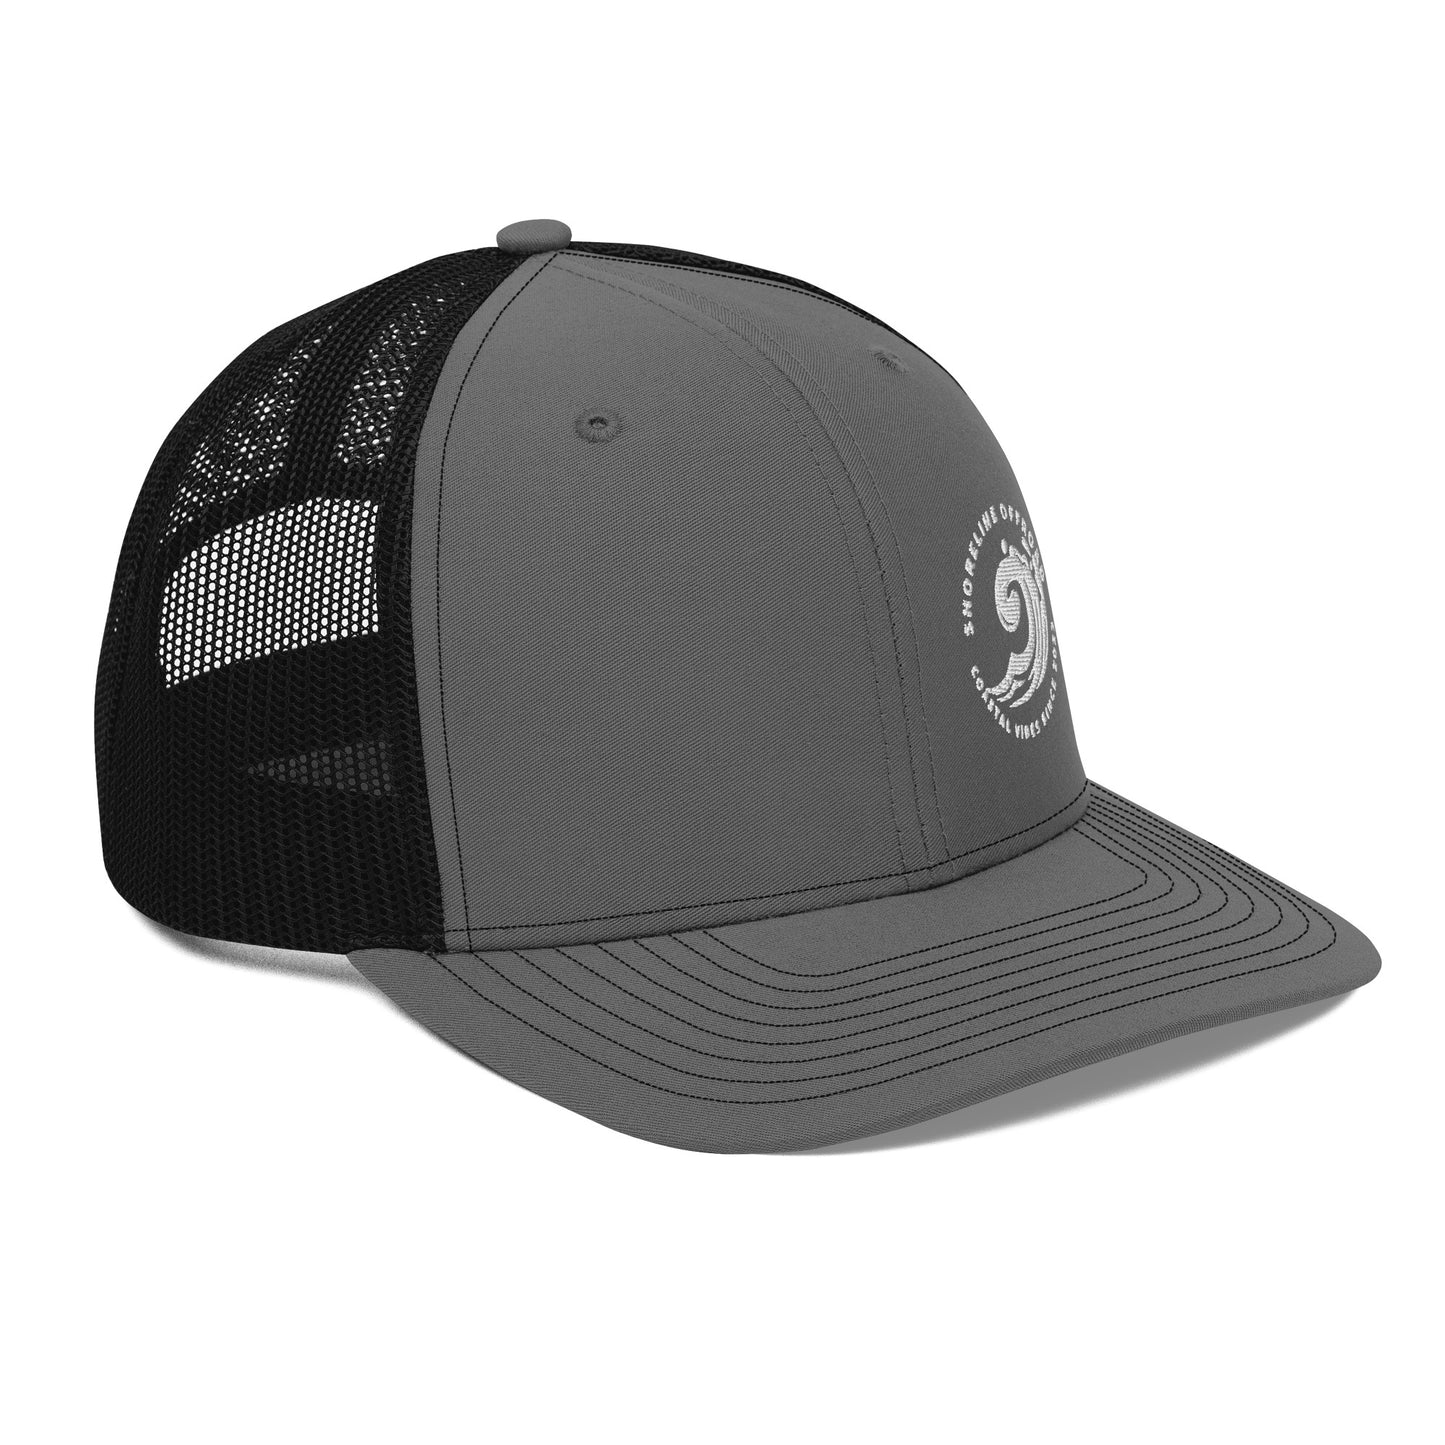 a grey and black trucker hat with an eye on the front